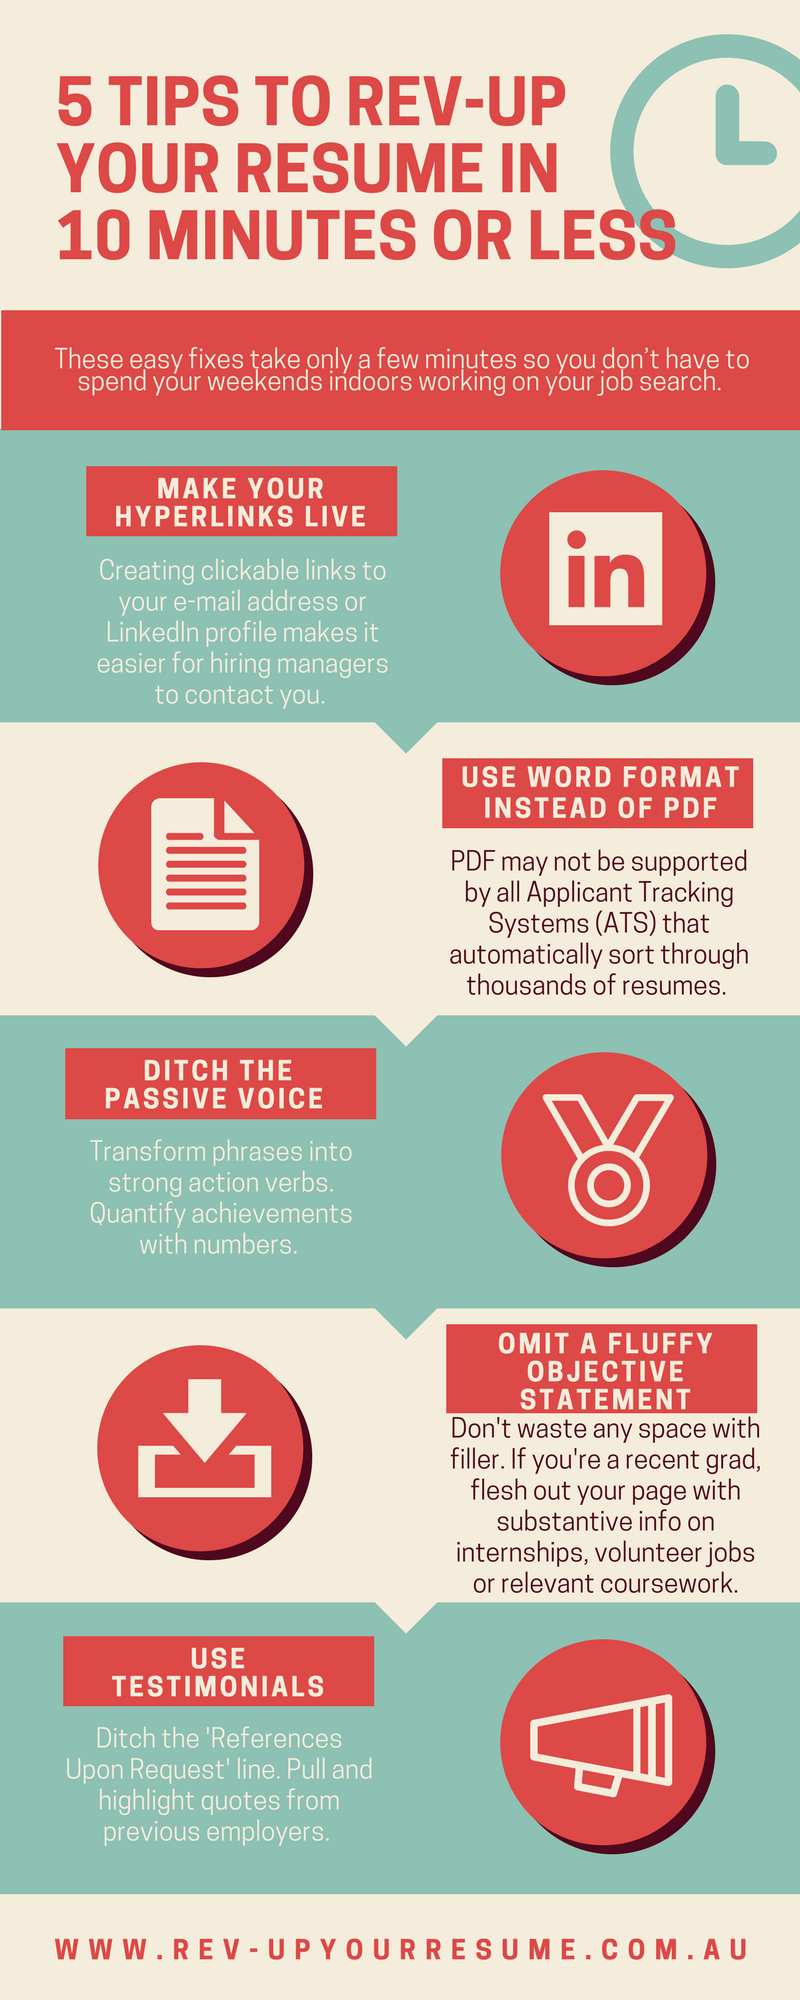 5 Quick Tips to Rev-Up Your Resume